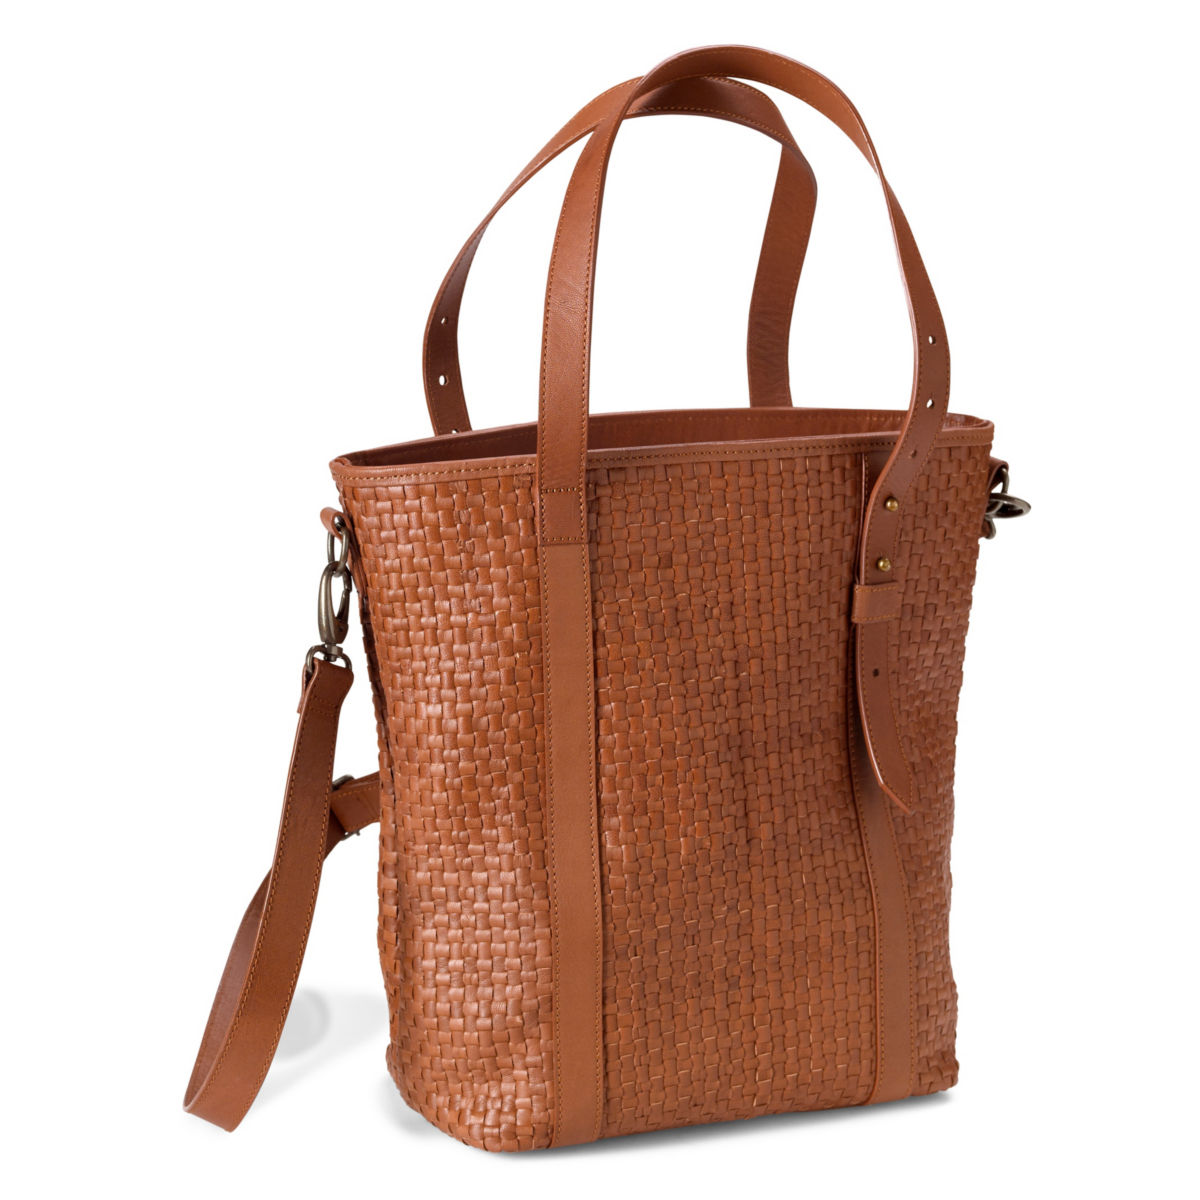 Saddle Ridge Woven Leather Tote - COGNACimage number 0